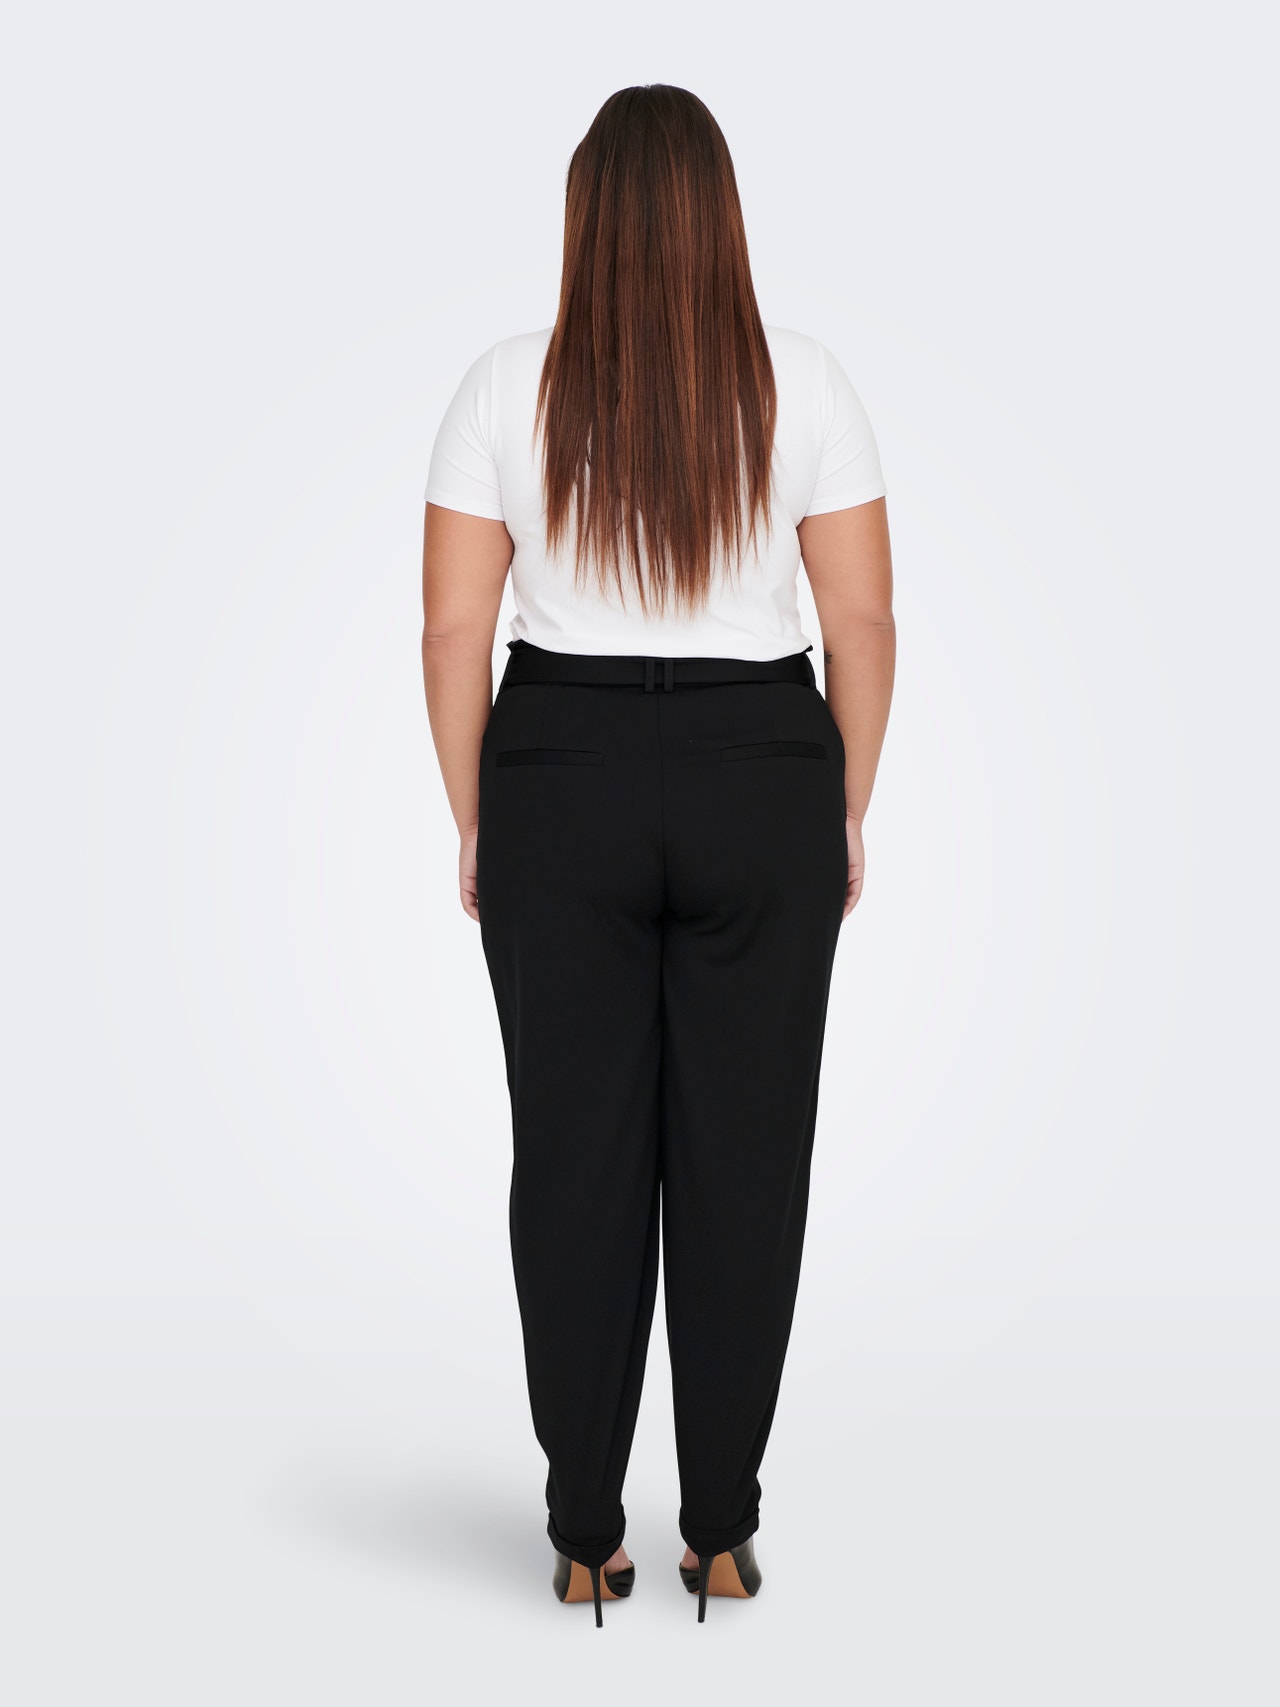 Curvy trousers with belt with 20% discount!